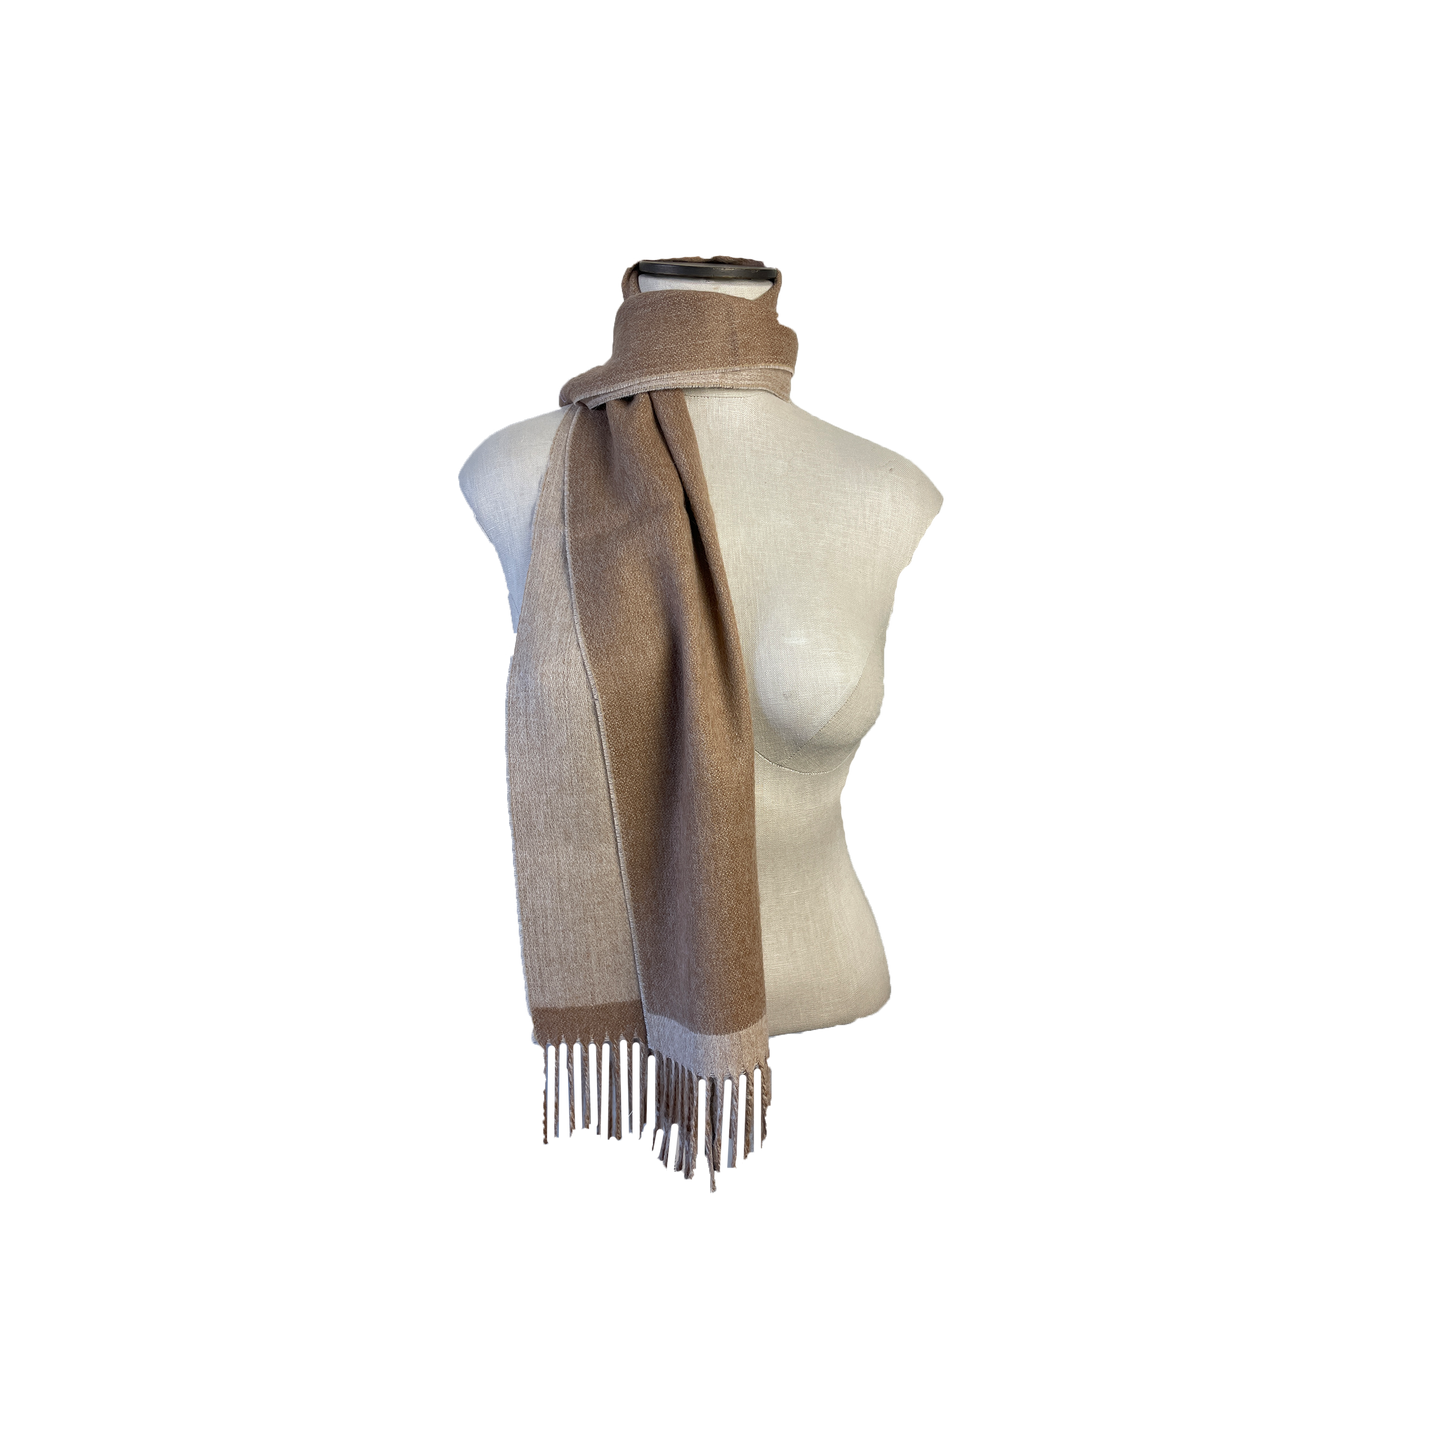 Alpaca Double Face Scarf in Camel and Beige